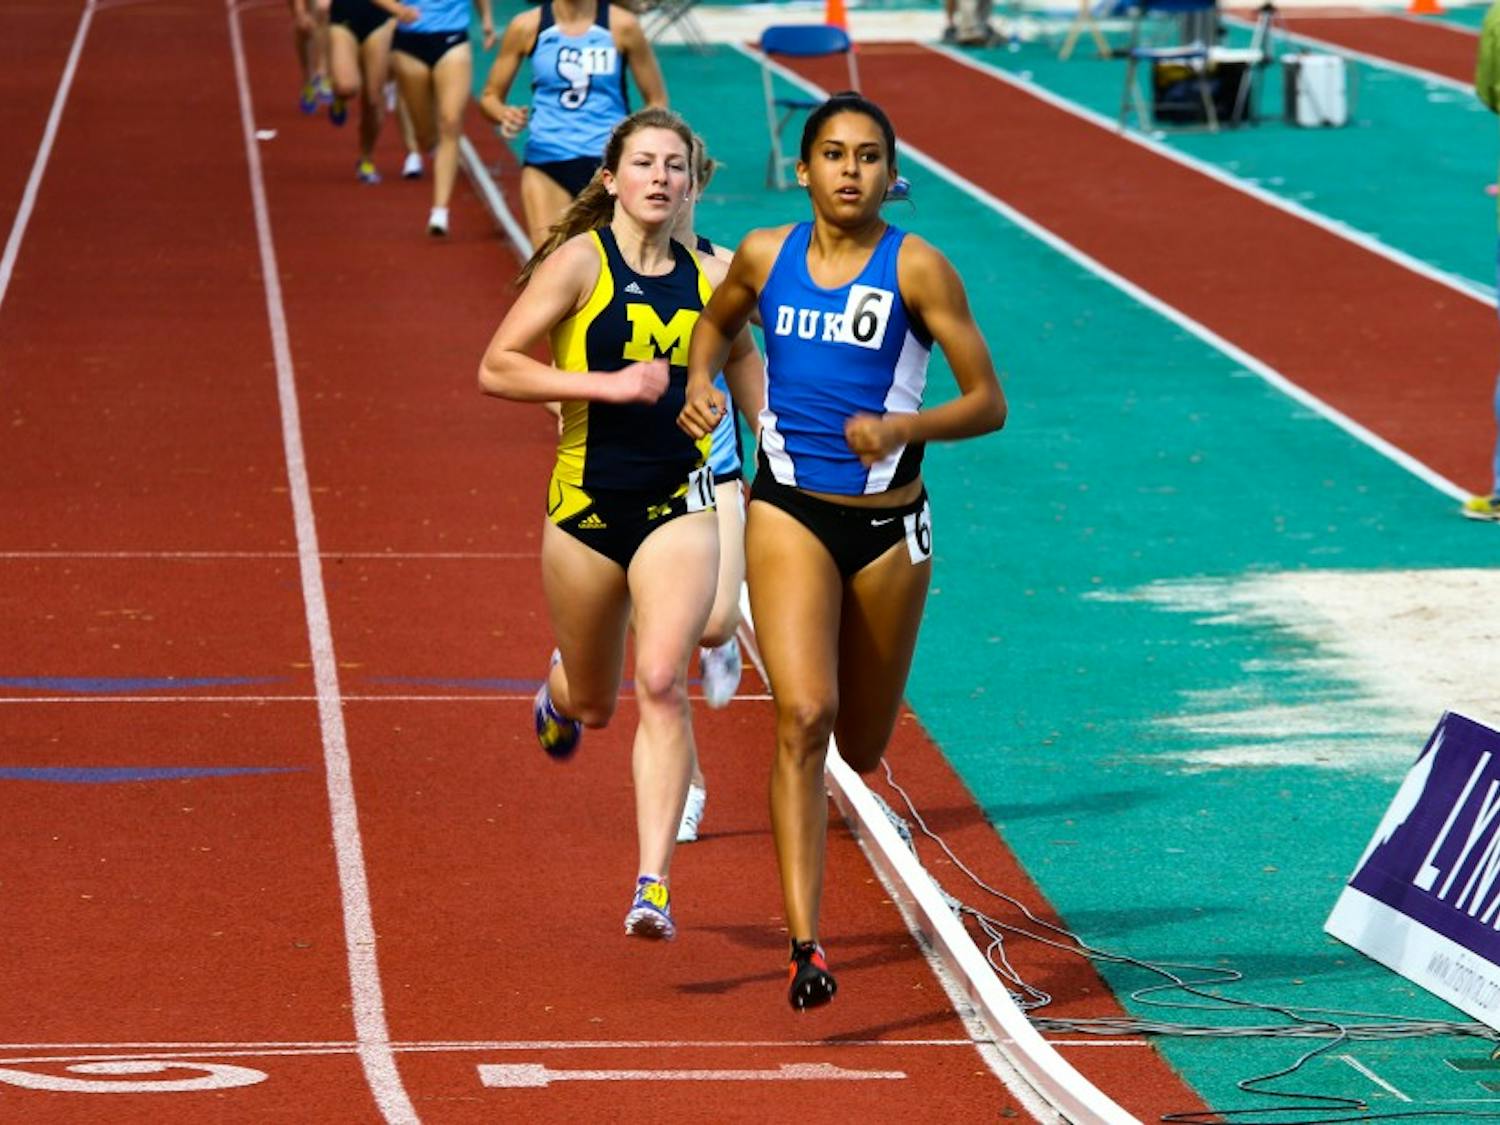 Senior Anima Banks continued her dominance in the outdoor season this weekend, winning both the mile and 800 meters at the Spec Towns Invitational.